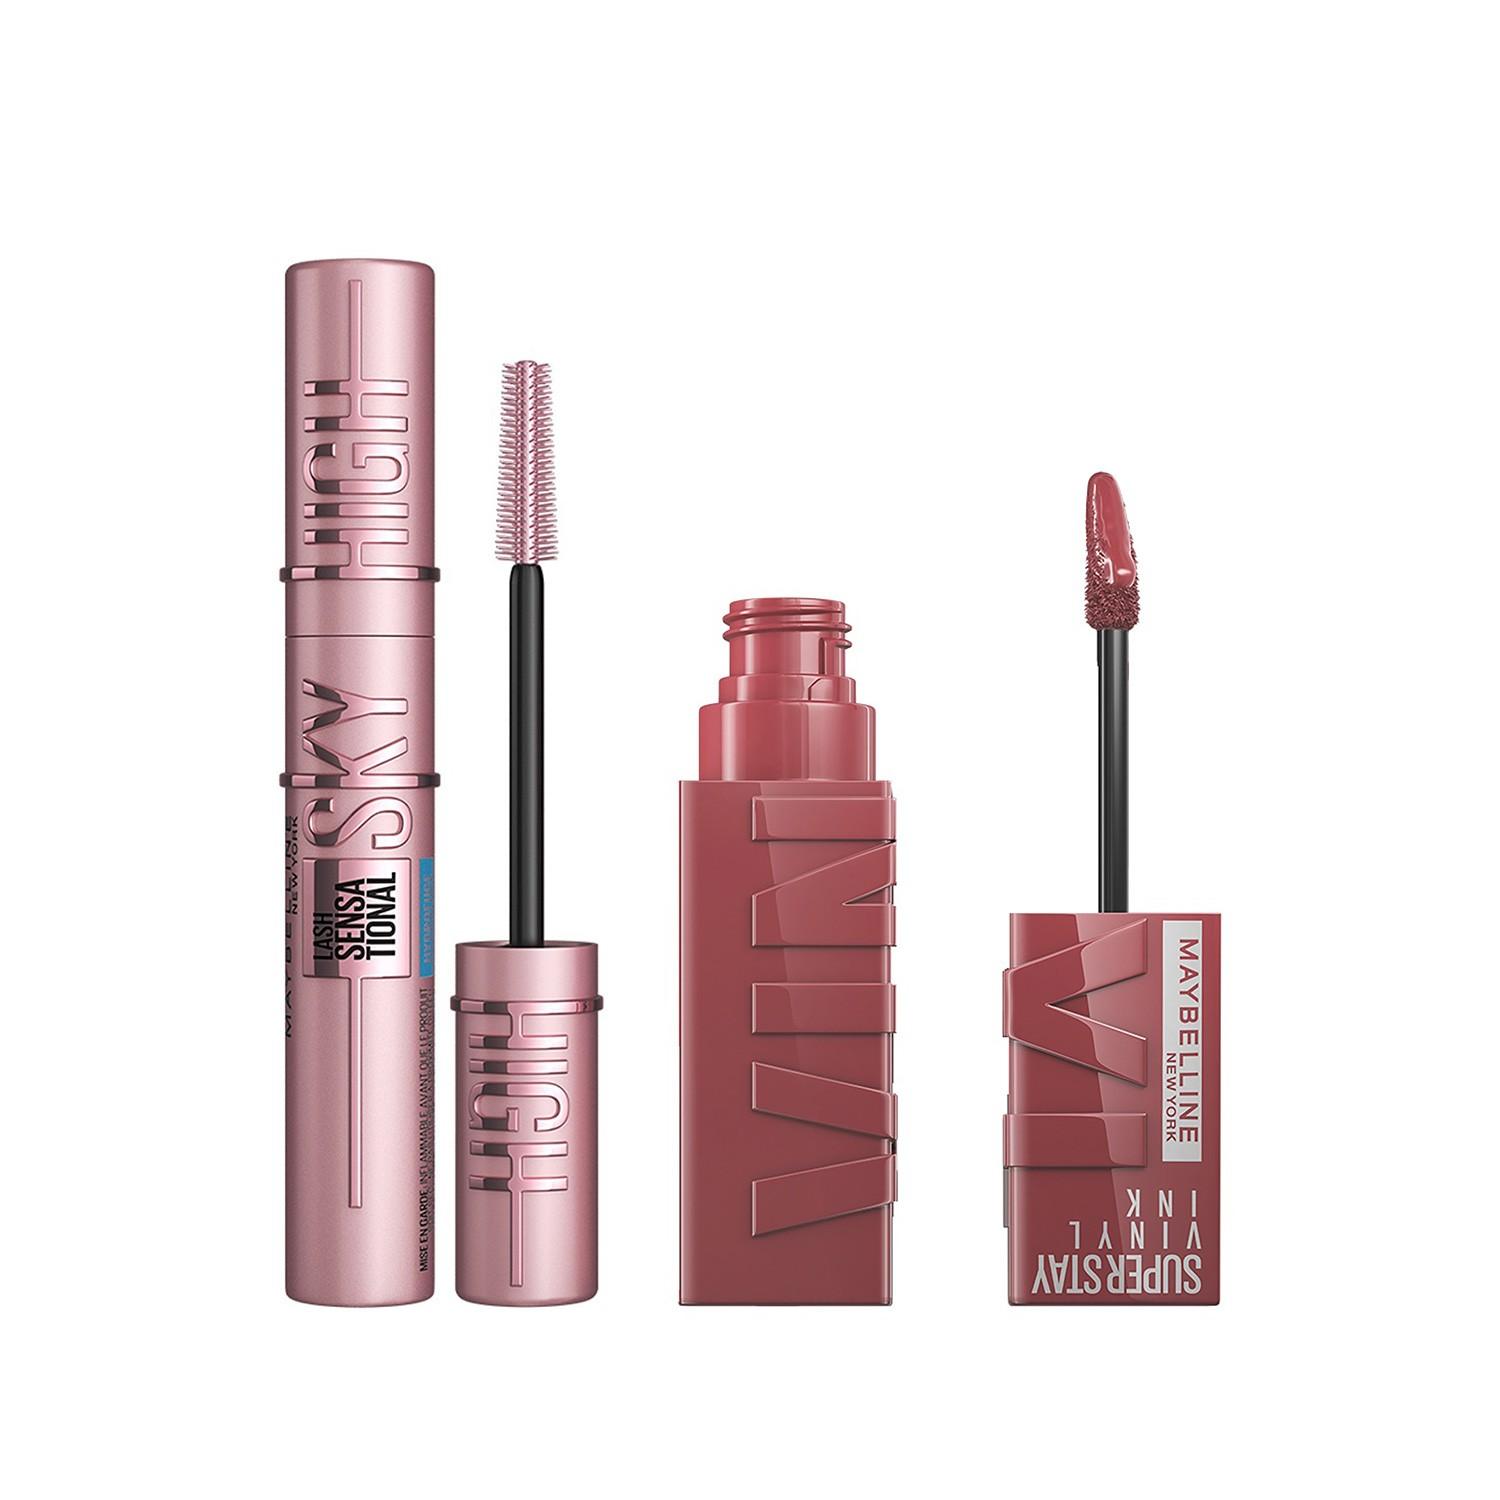 Maybelline New York | Maybelline New York Sky High Mascara and Super Stay Vinyl Ink Liquid Lipstick (Witty)